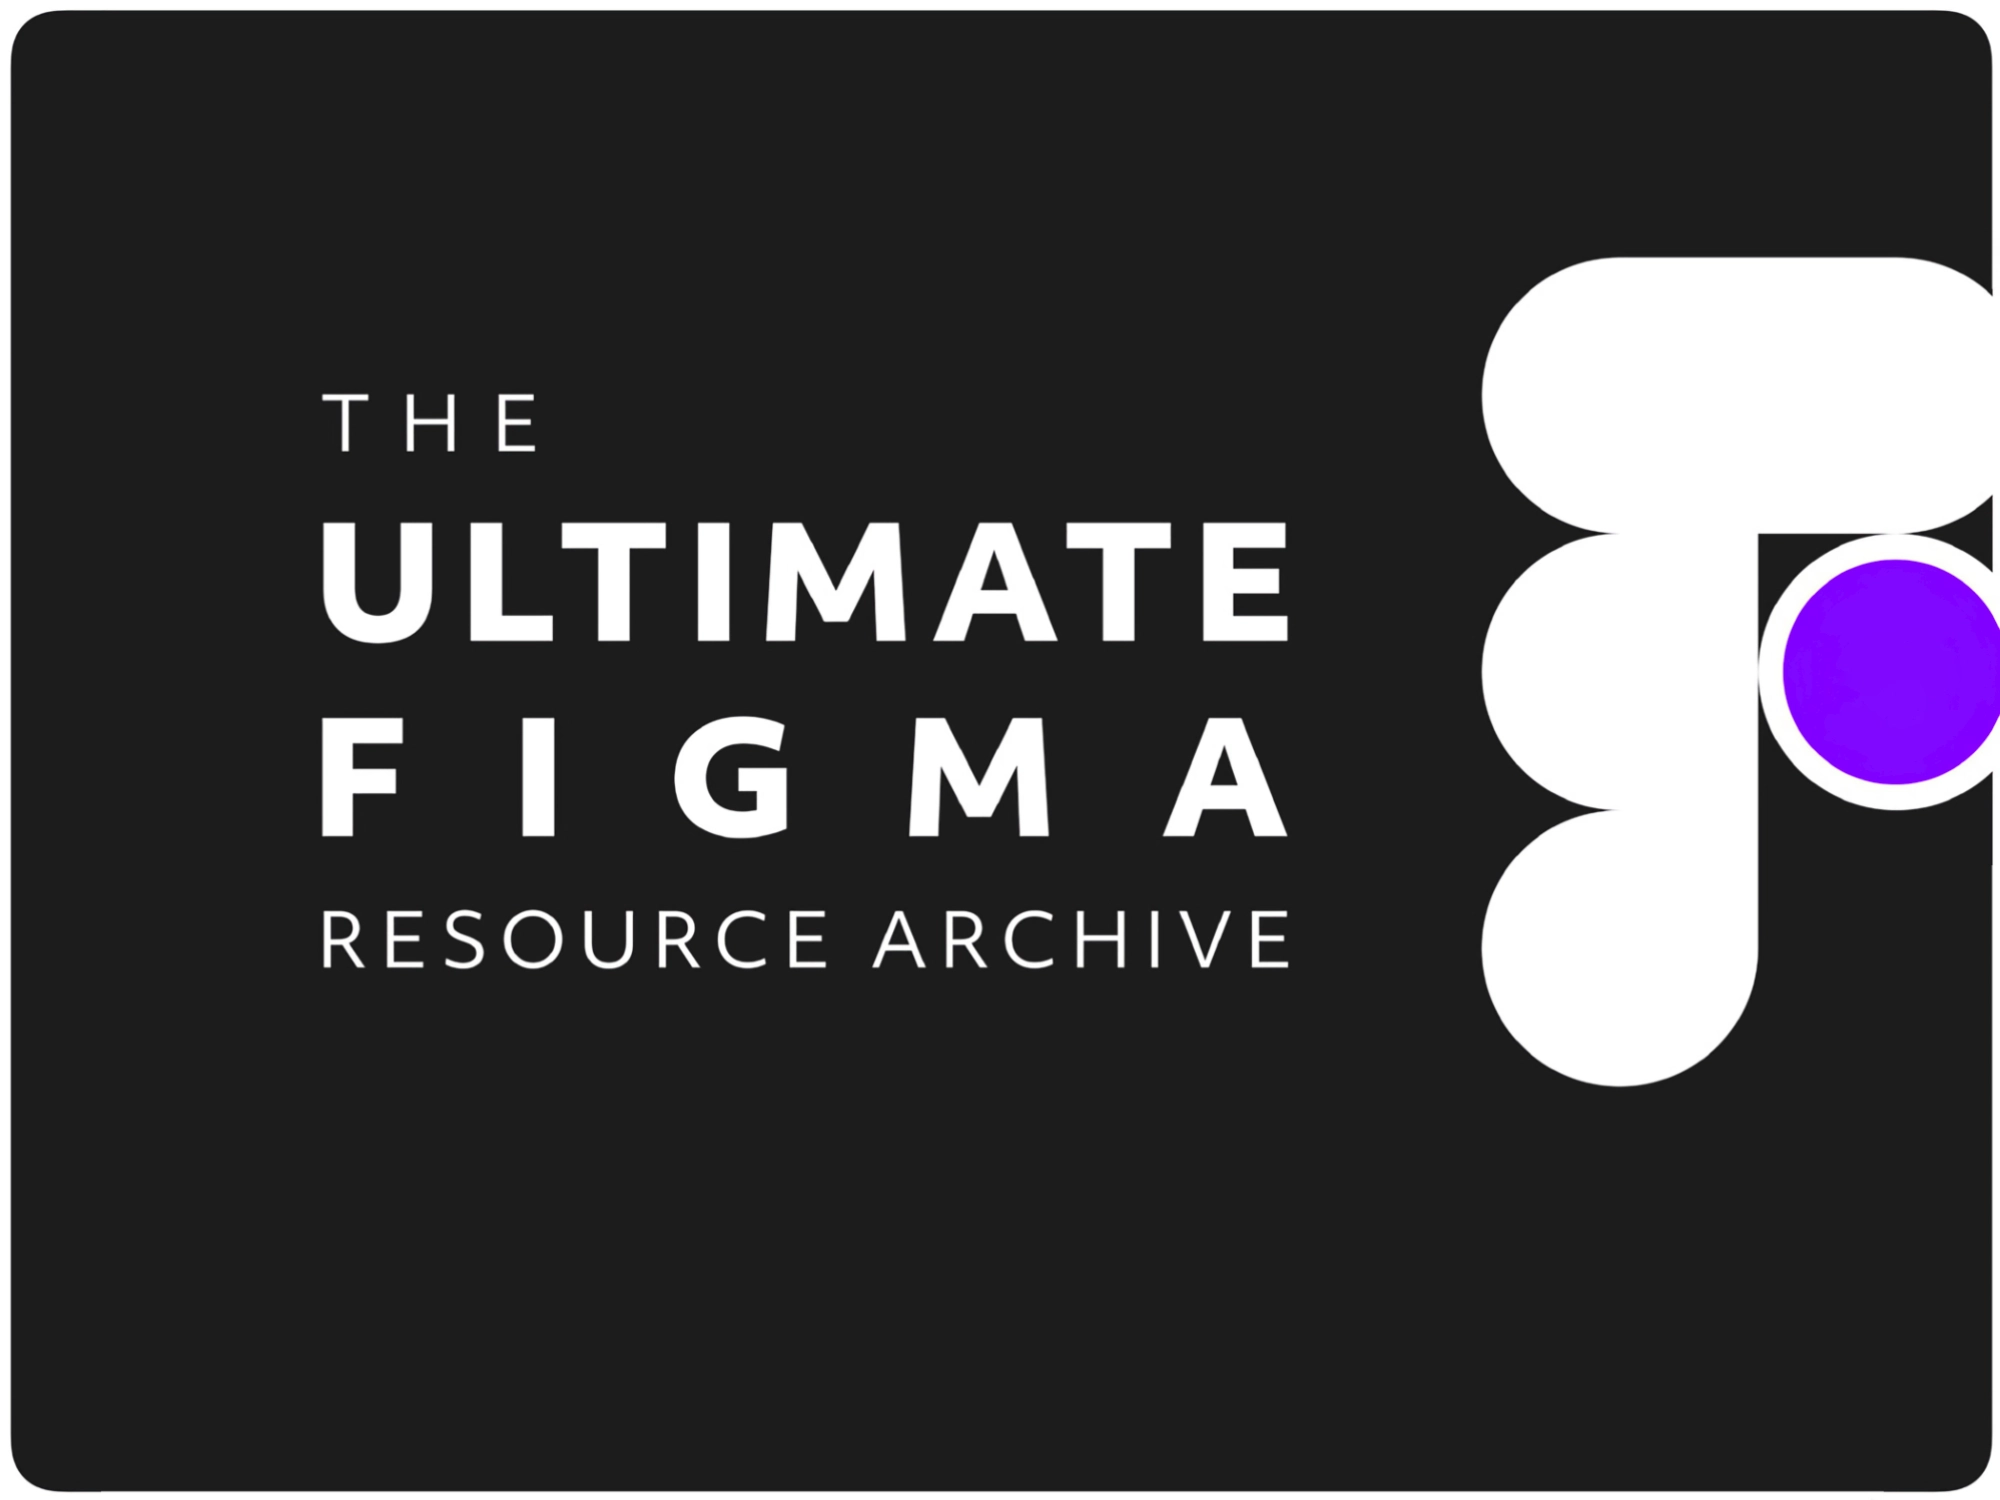 The Ultimate Figma resource archive